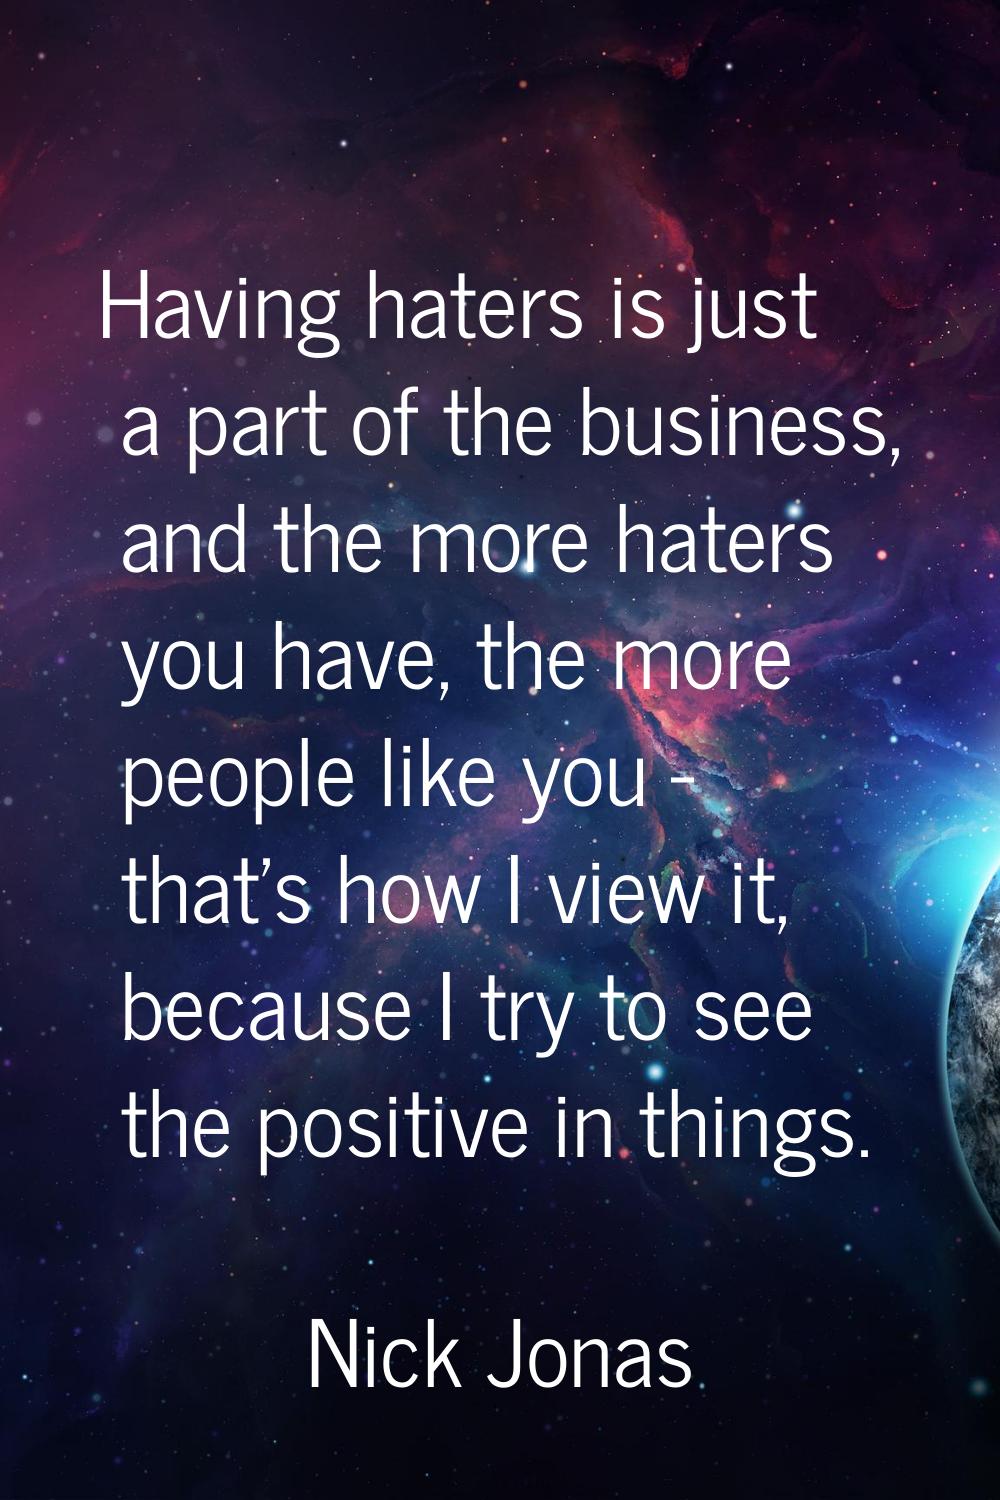 Having haters is just a part of the business, and the more haters you have, the more people like yo